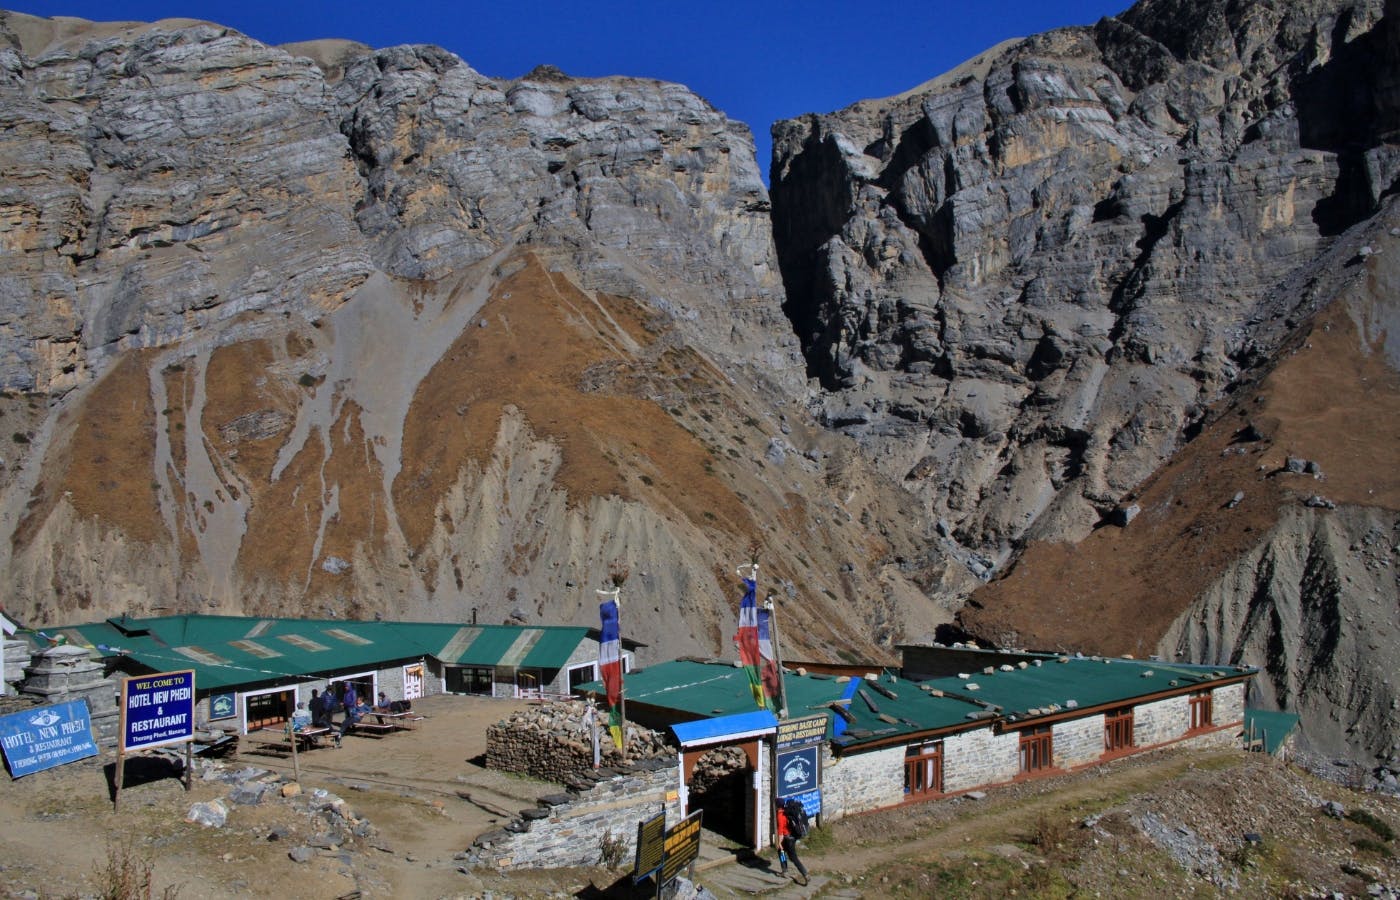 Lodges of the High Camp 4900m.